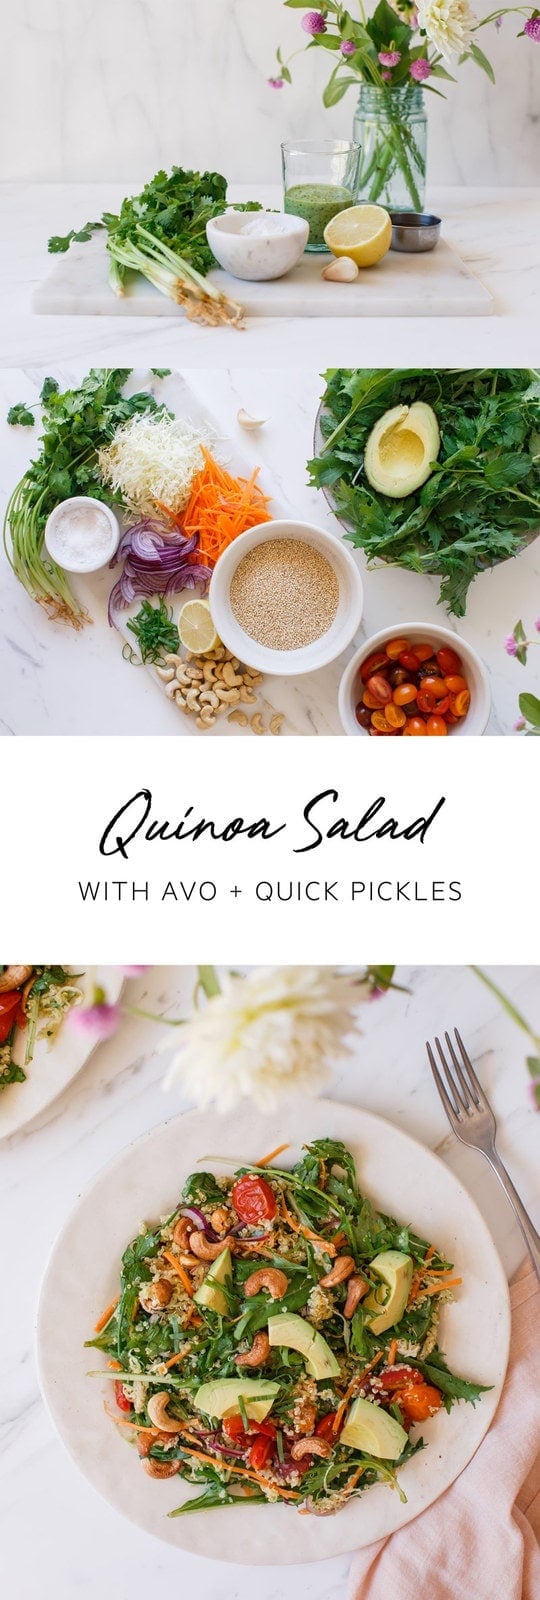 A superfoods quinoa salad with avocado and toasted cashews. Add a vegan Green Goddess dressing and some quick meals, and you’ve got one plant-based meal. #quinoasalad #plantbased #vegansalad #vegetariansalad #glutenfreesalad #vegandressing #greengoddessdressing #quickpickles #easyvegandinner #easyvegansalad #AscensionKitchen